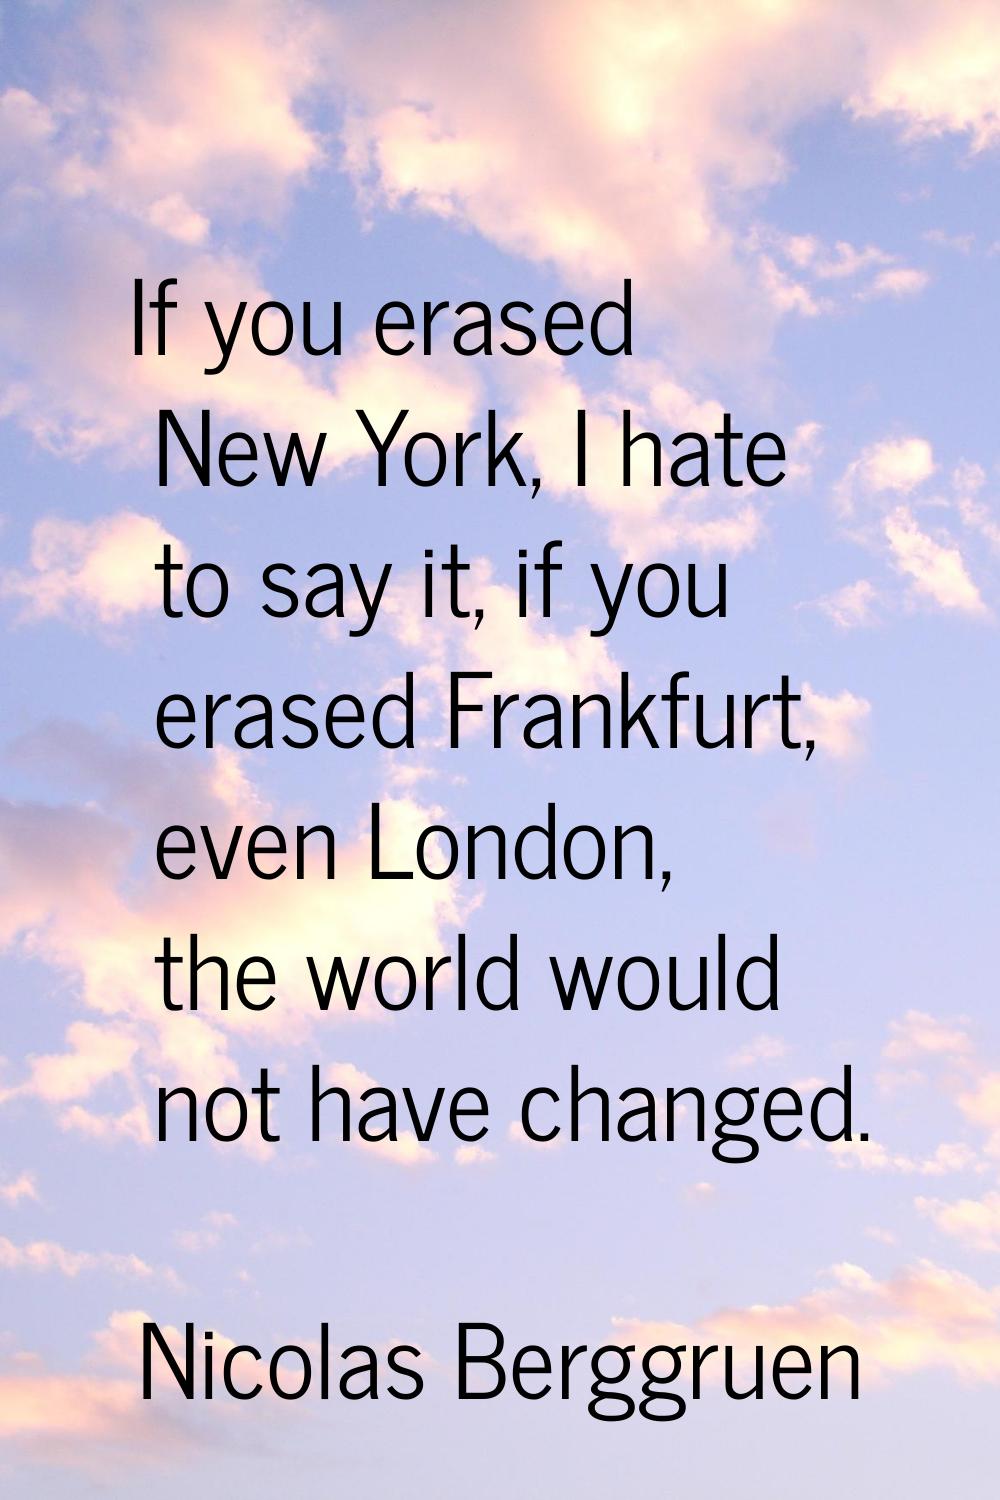 If you erased New York, I hate to say it, if you erased Frankfurt, even London, the world would not